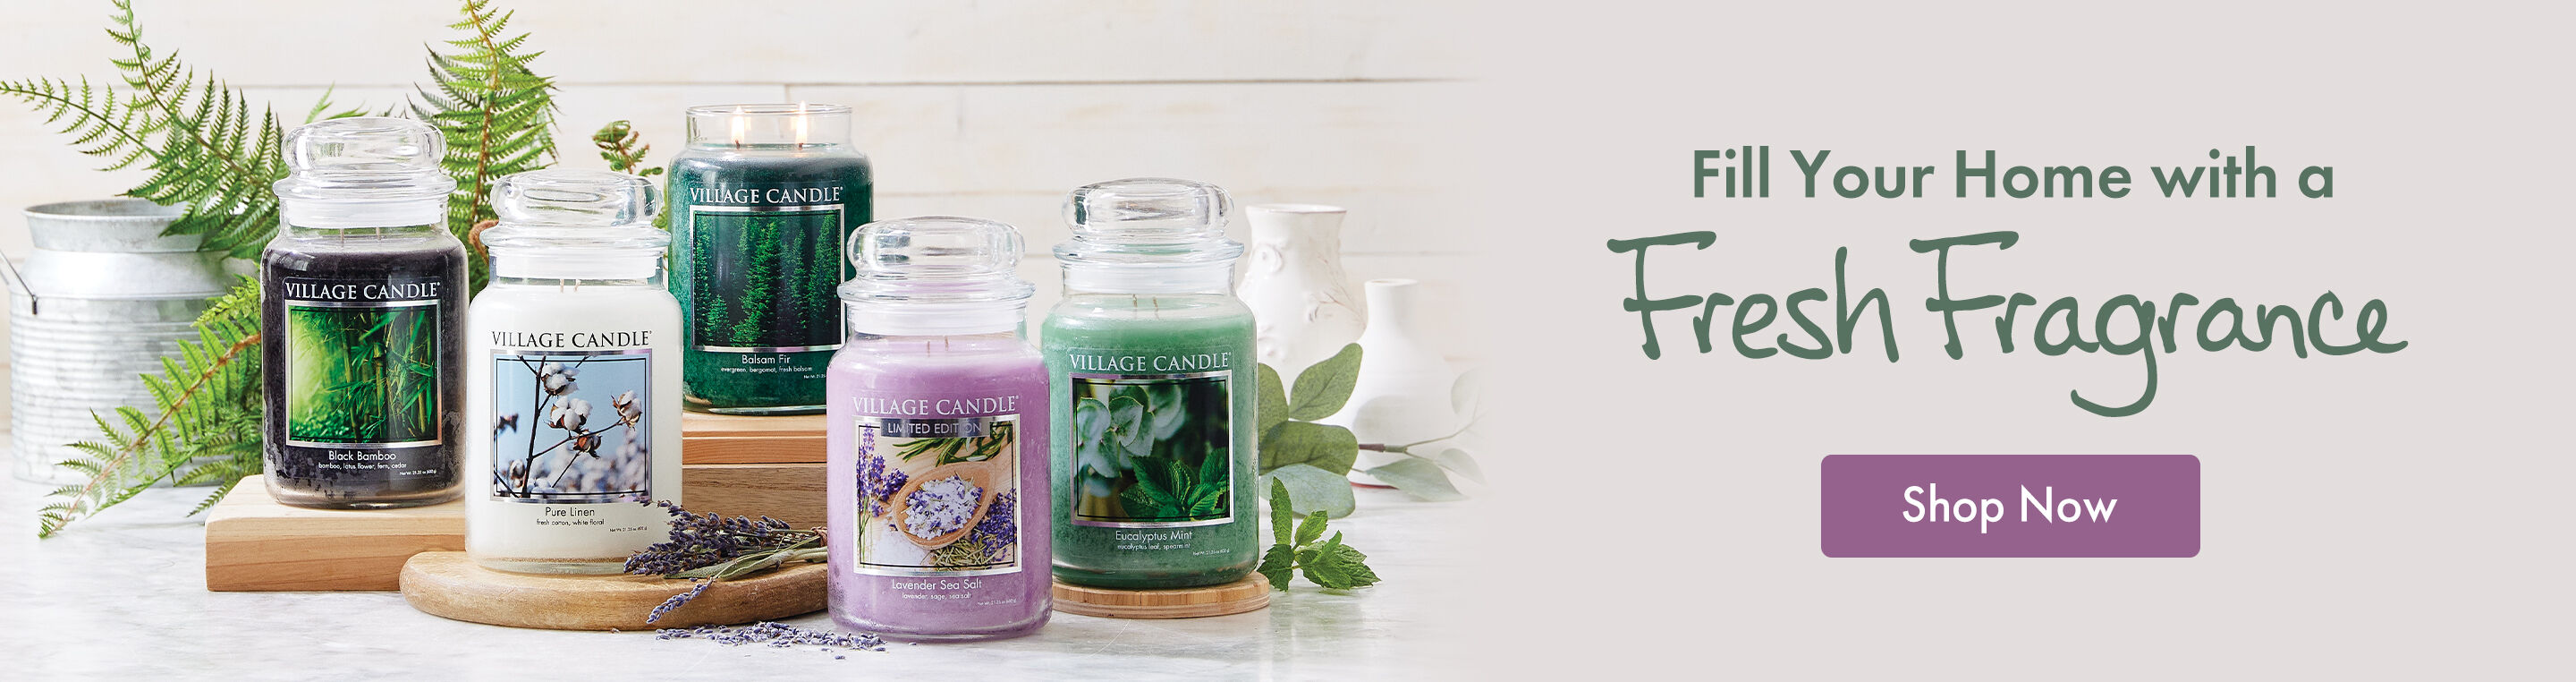 Fill Your Home with a Fresh Fragrance - Shop Candles